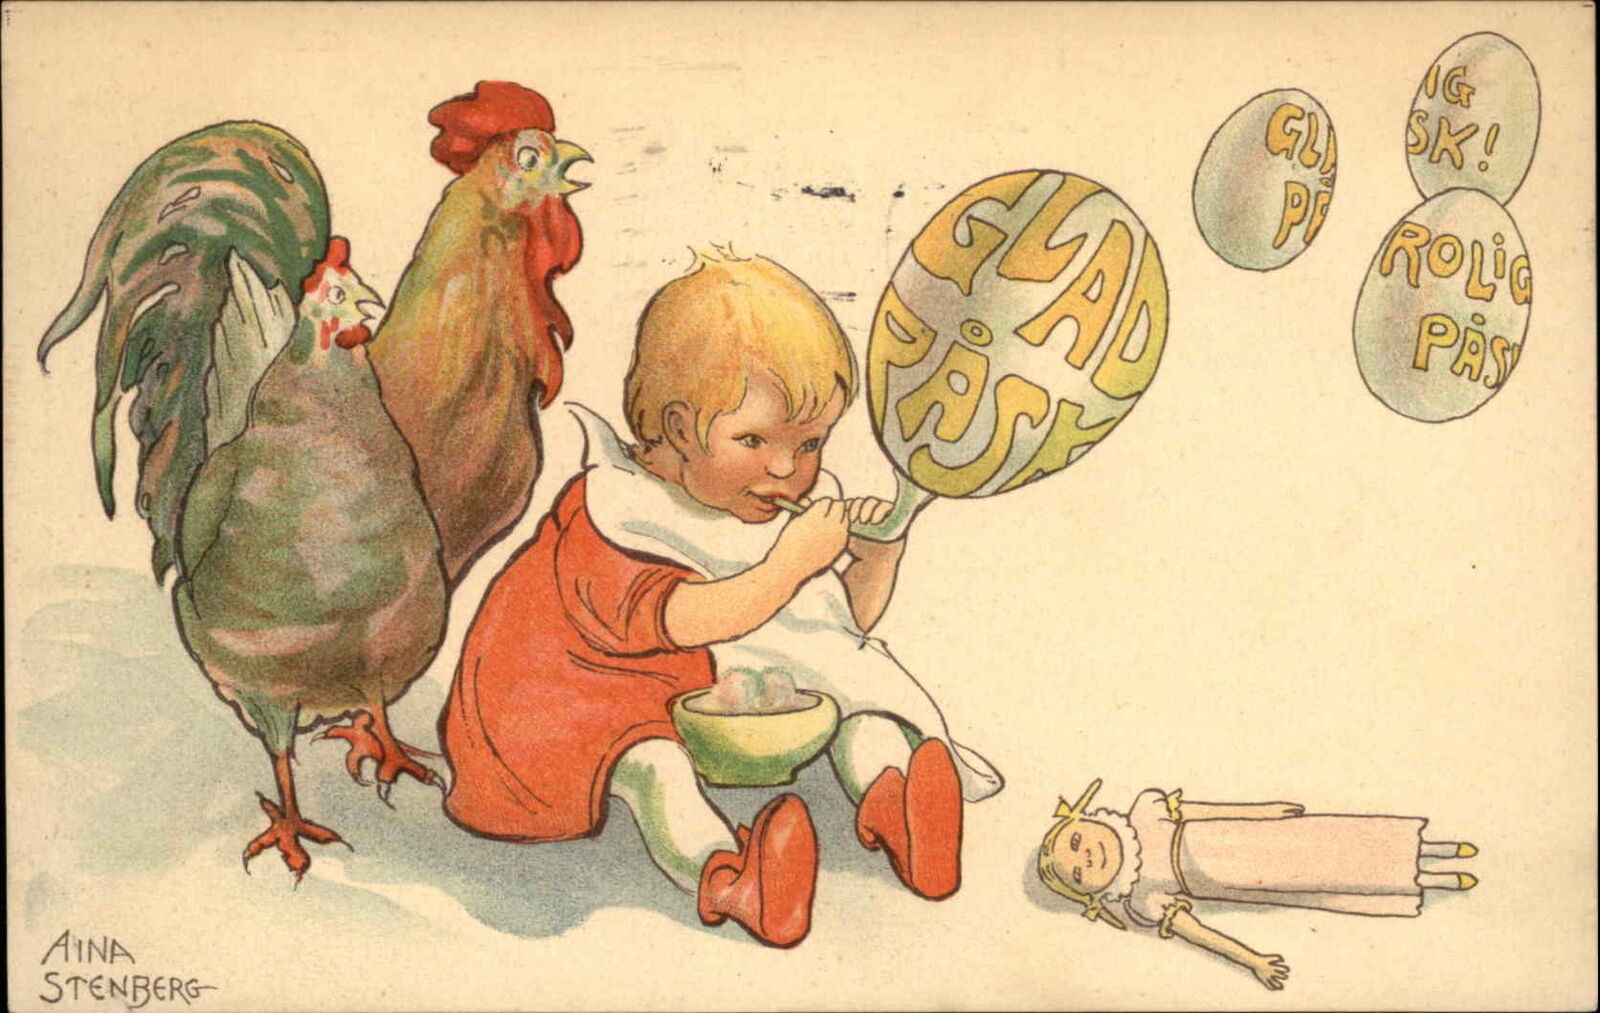 Swedish Easter Boy Blowing Glad Pask Bubbles Aina Stenberg c1910 Postcard